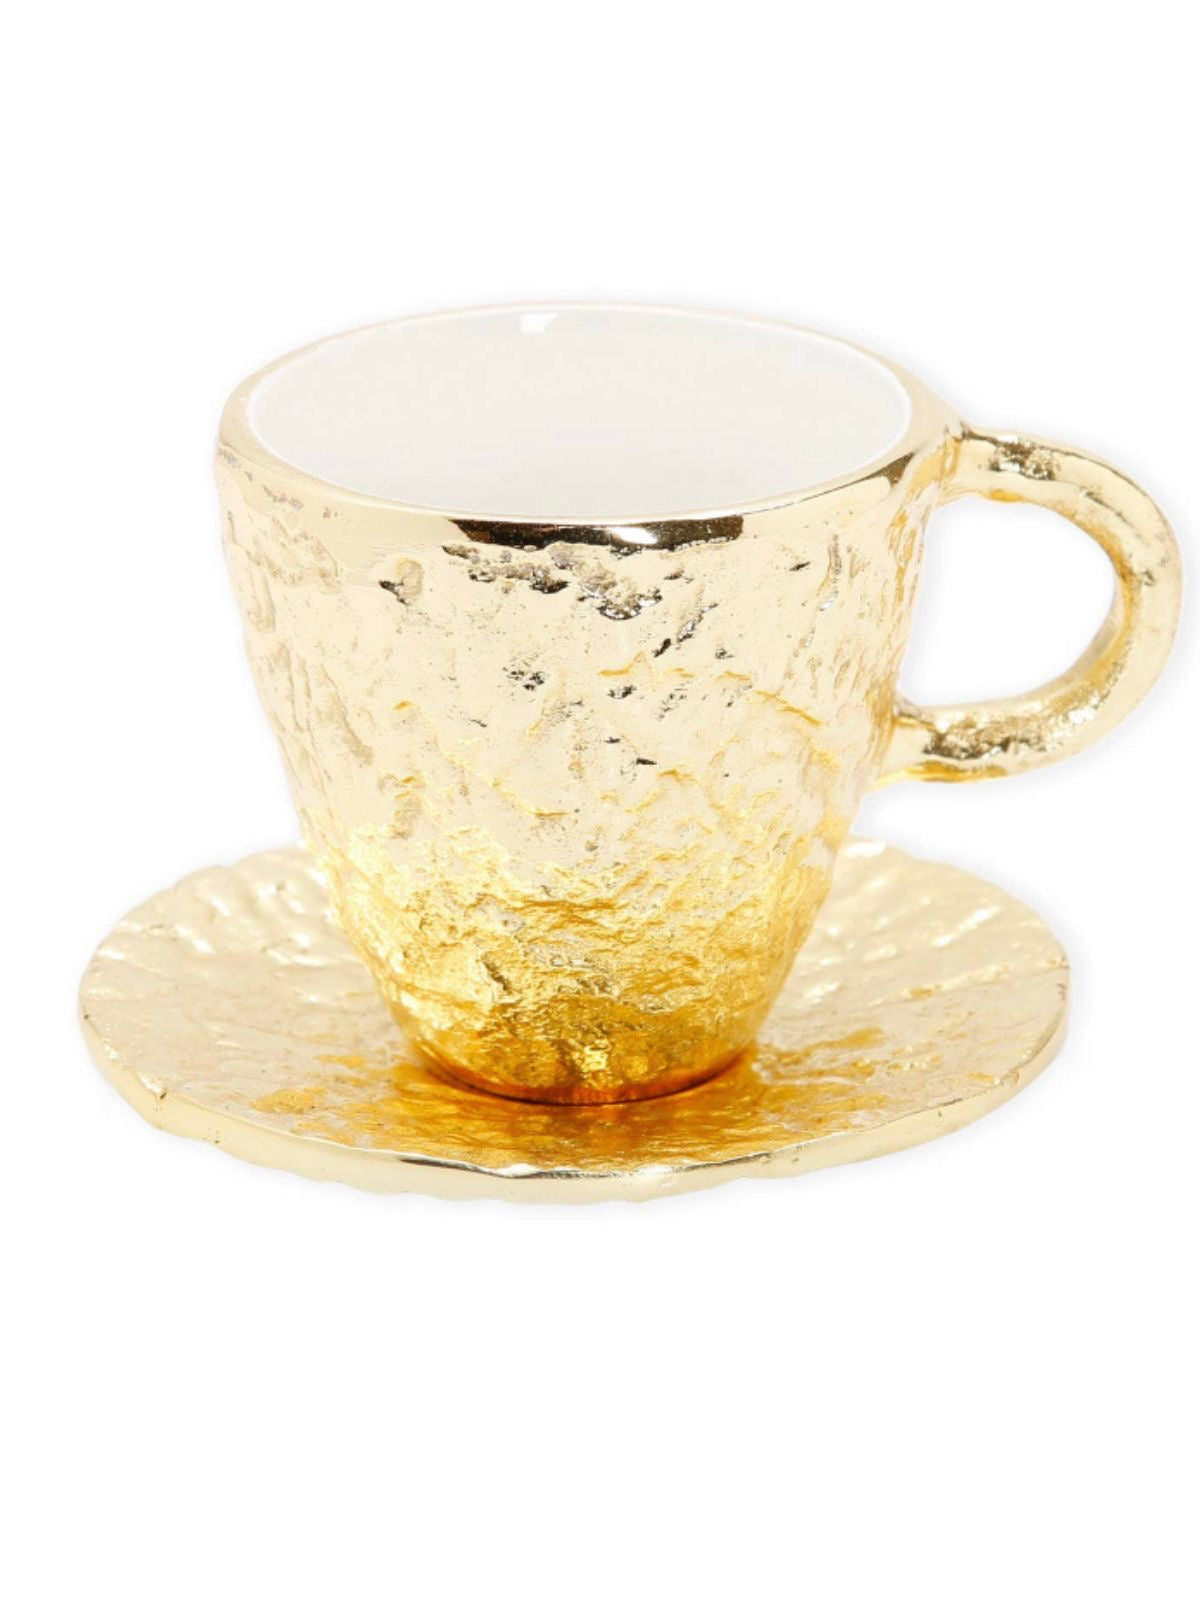 The Amazing Tazza D’ Oro Coffee Mug with Saucer Has a Beautiful Gold Textured Metal Outer and White Enamel Inside Available At KYA Home Decor